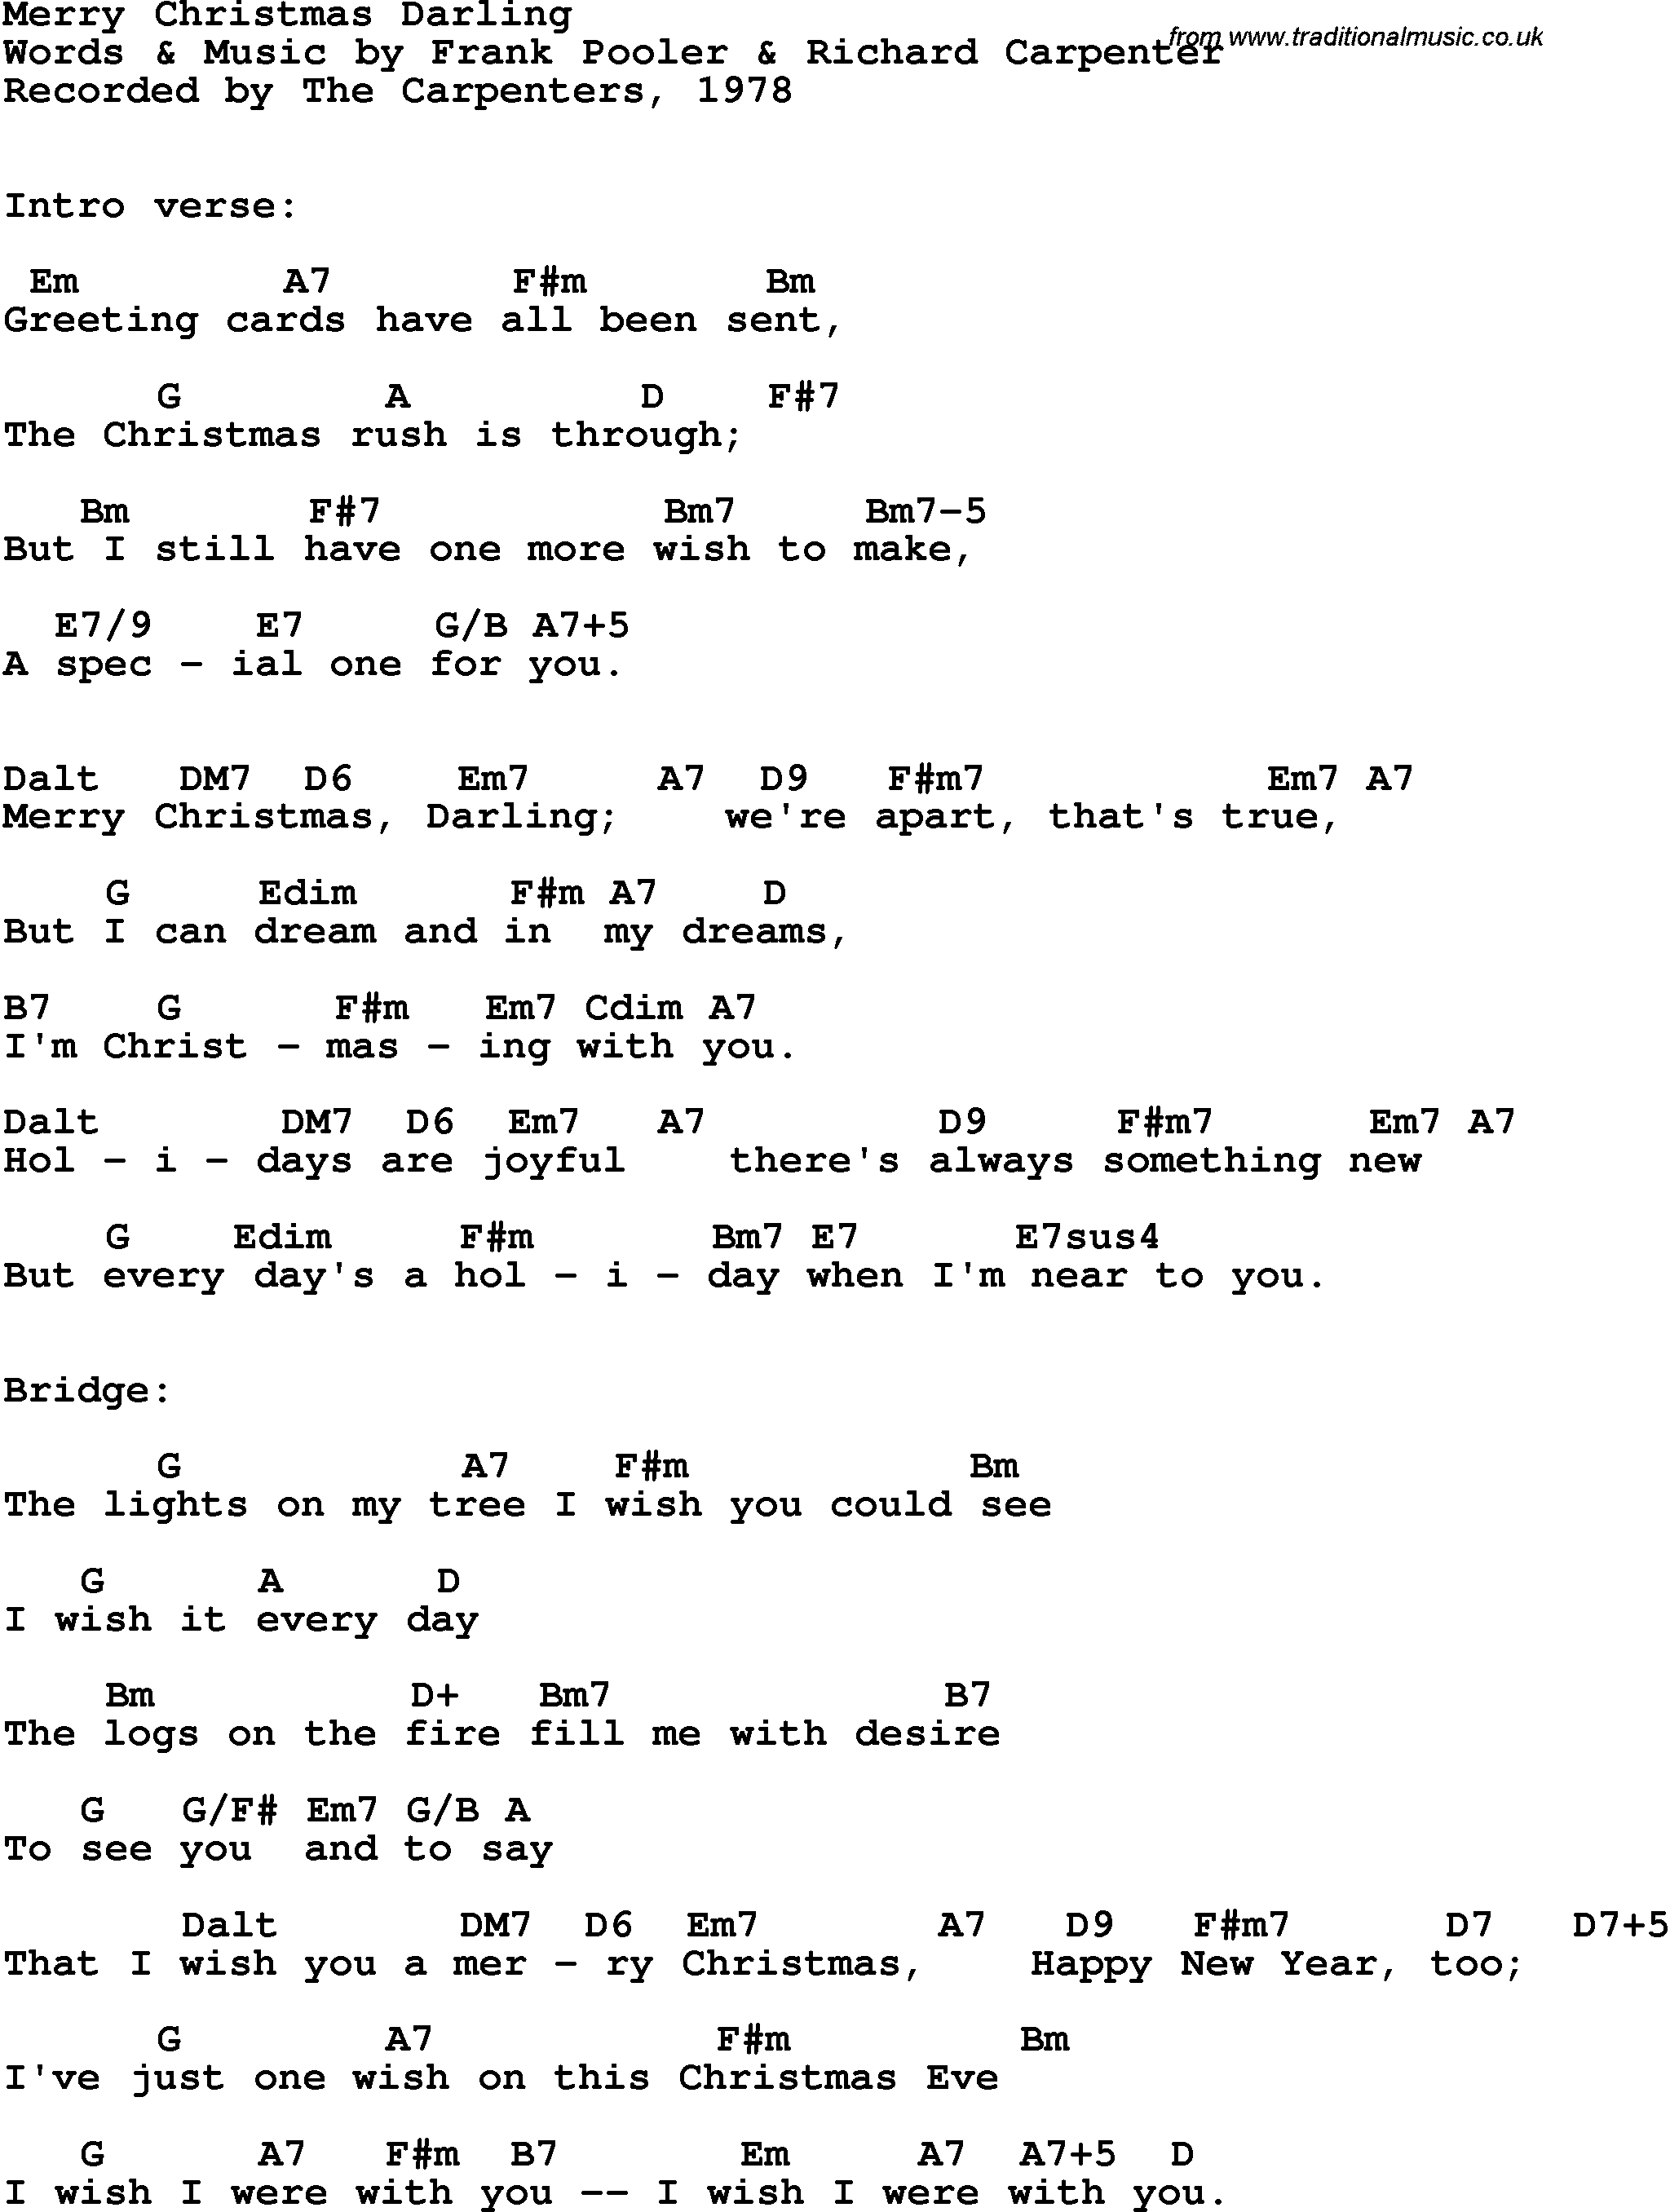 Song Lyrics with guitar chords for Merry Christmas Darling - The Carpenters, 1978